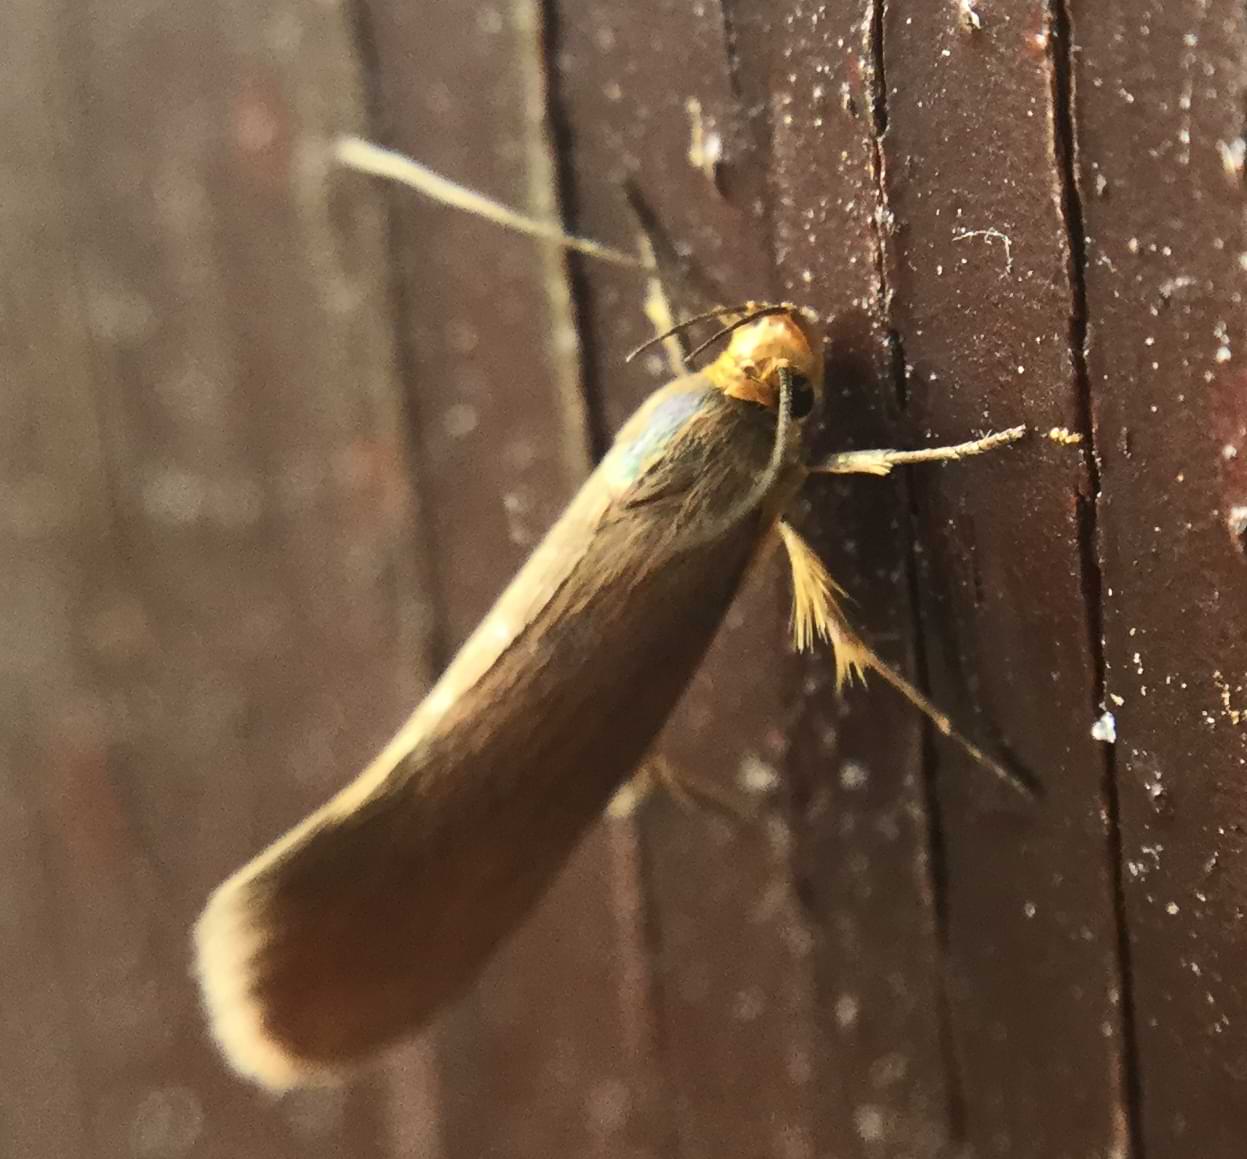 A small moth with a yellow head and brown wings. The wings are held closely together in a kind of pod shape.